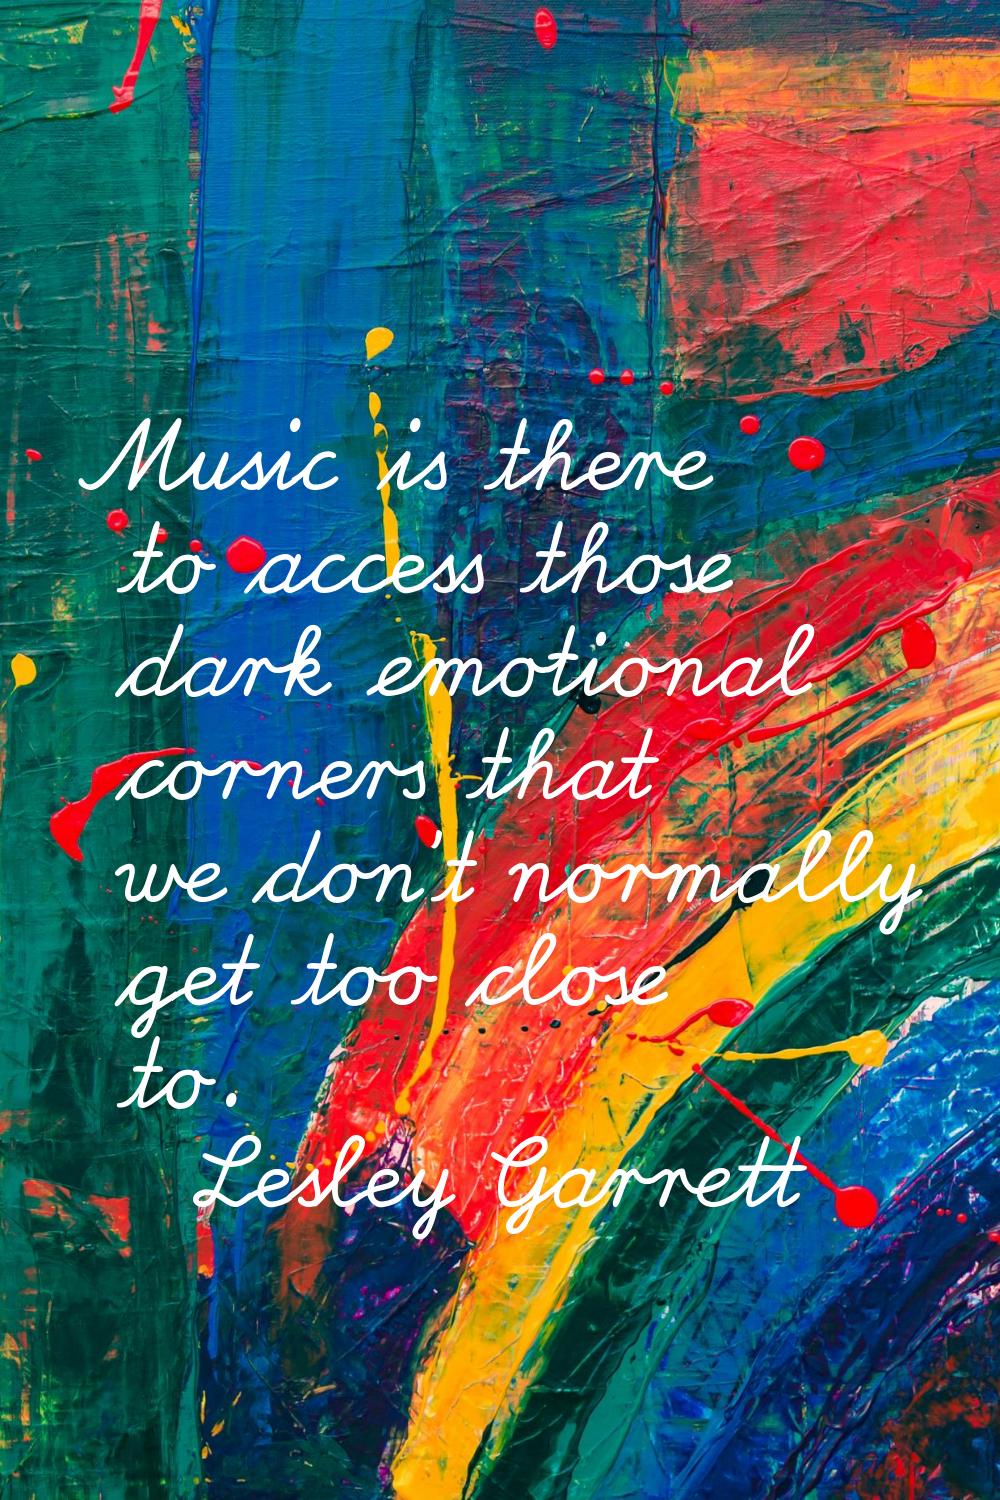 Music is there to access those dark emotional corners that we don't normally get too close to.